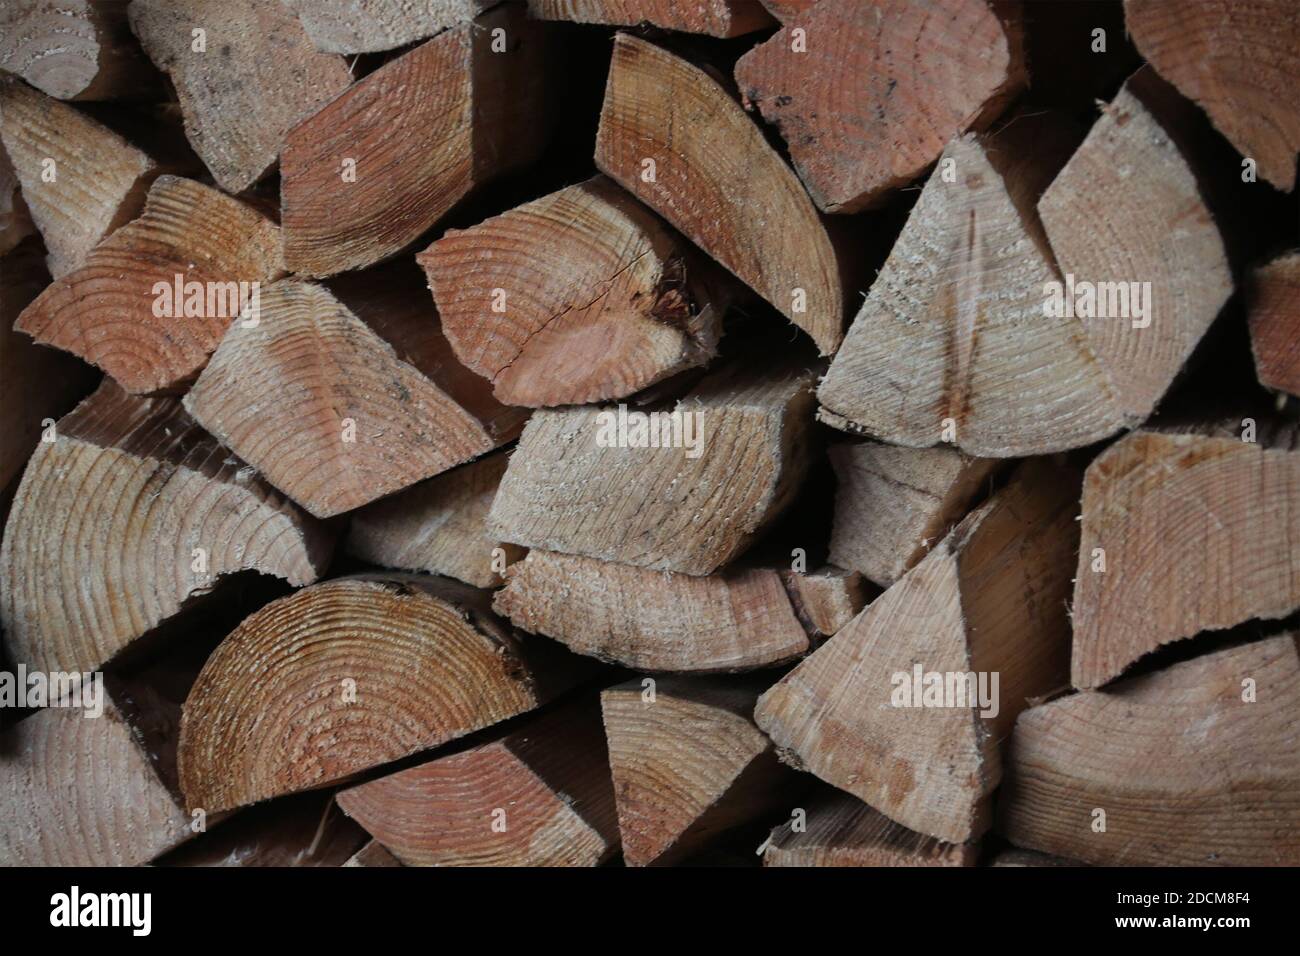 Cut Logs piled end to end Stock Photo